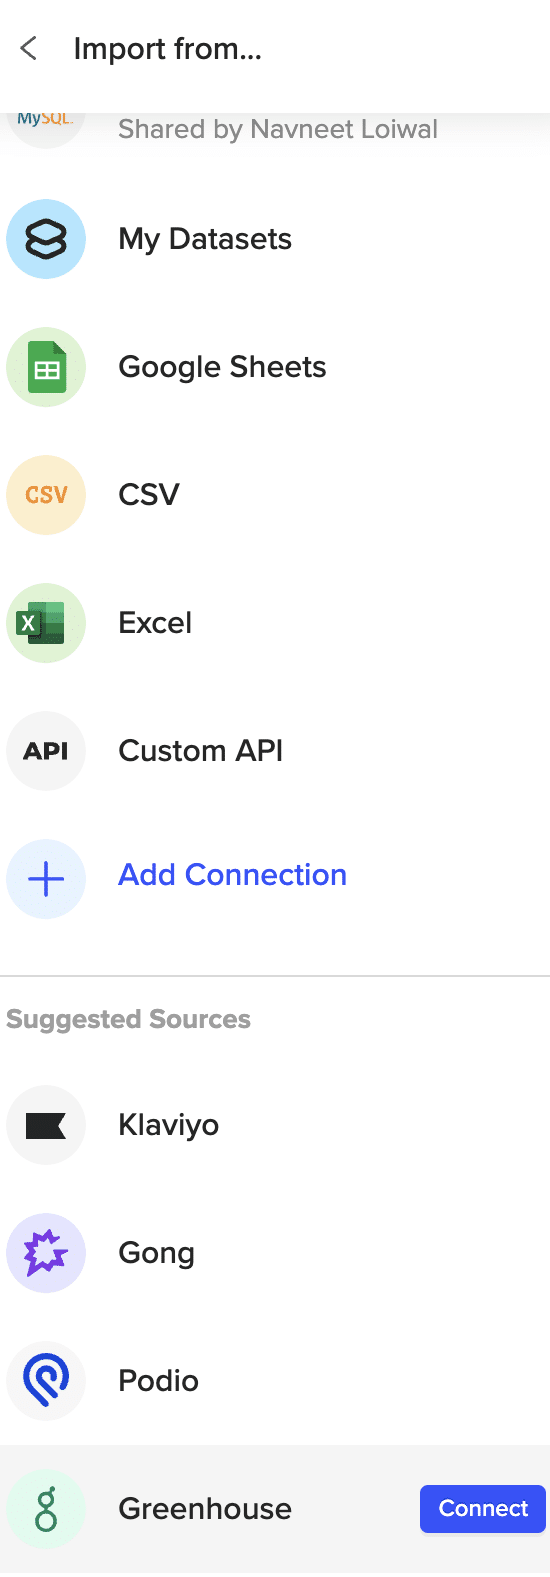 Locating and connecting to Greenhouse in the Coefficient dropdown menu in Excel.